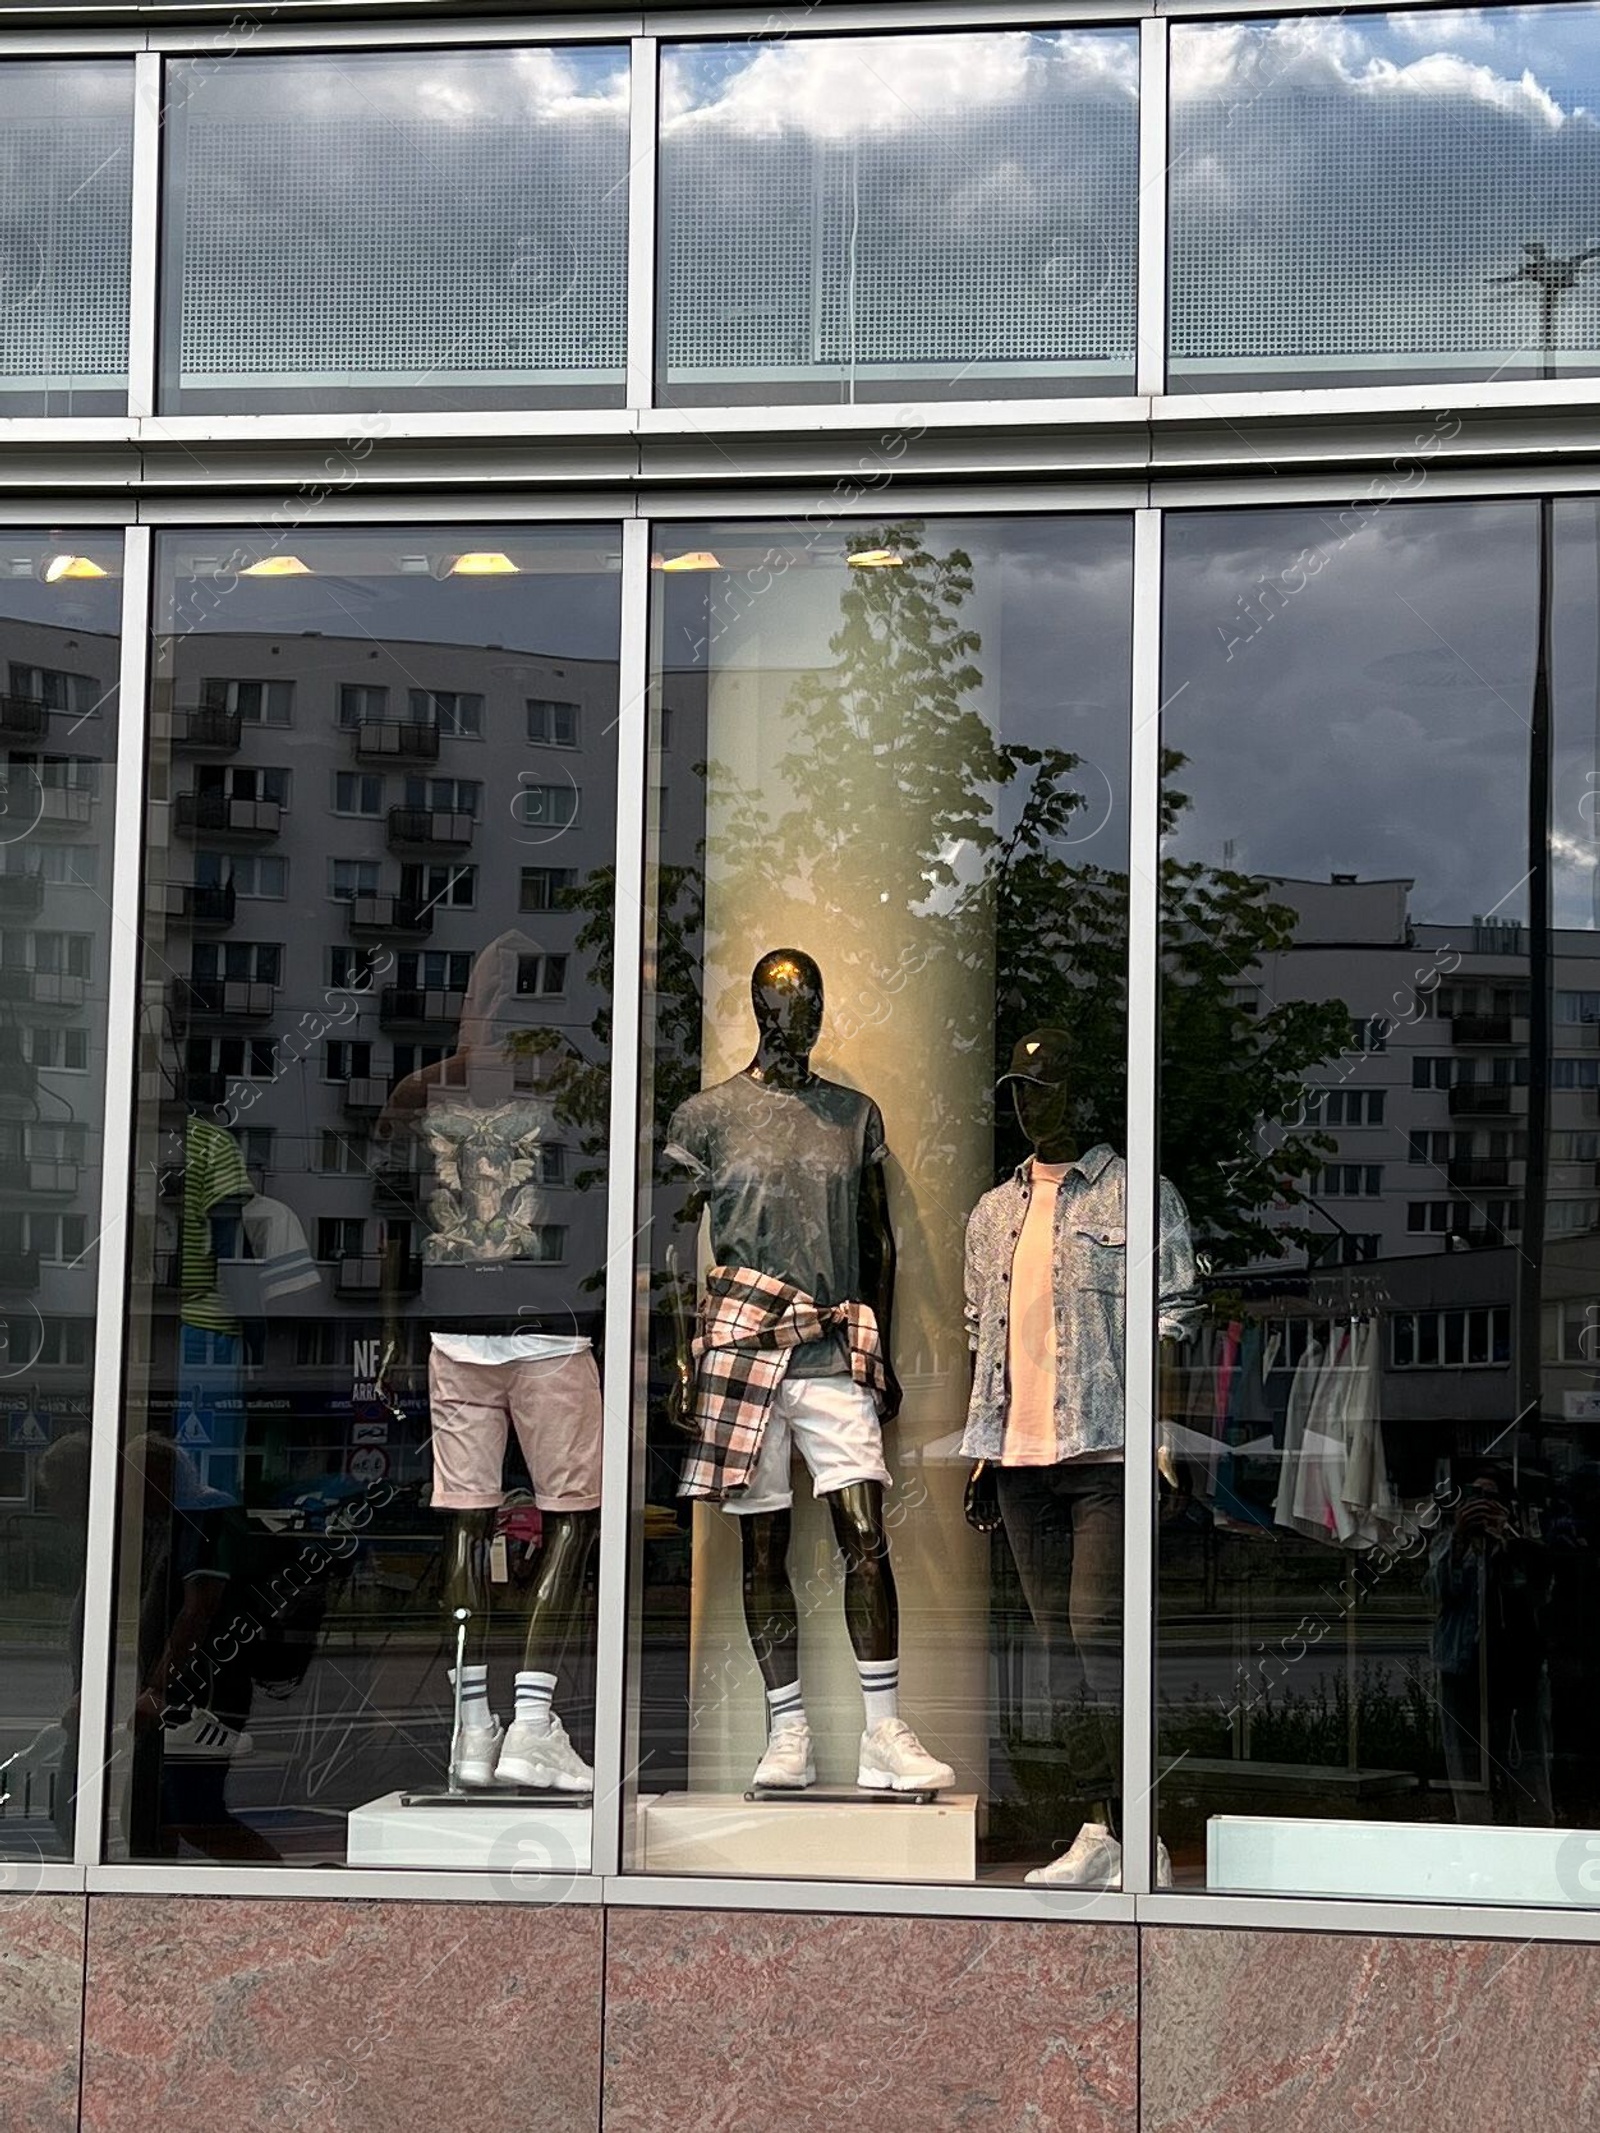 Photo of WARSAW, POLAND - JULY 17, 2022: Display of official BALLADINE store on city street